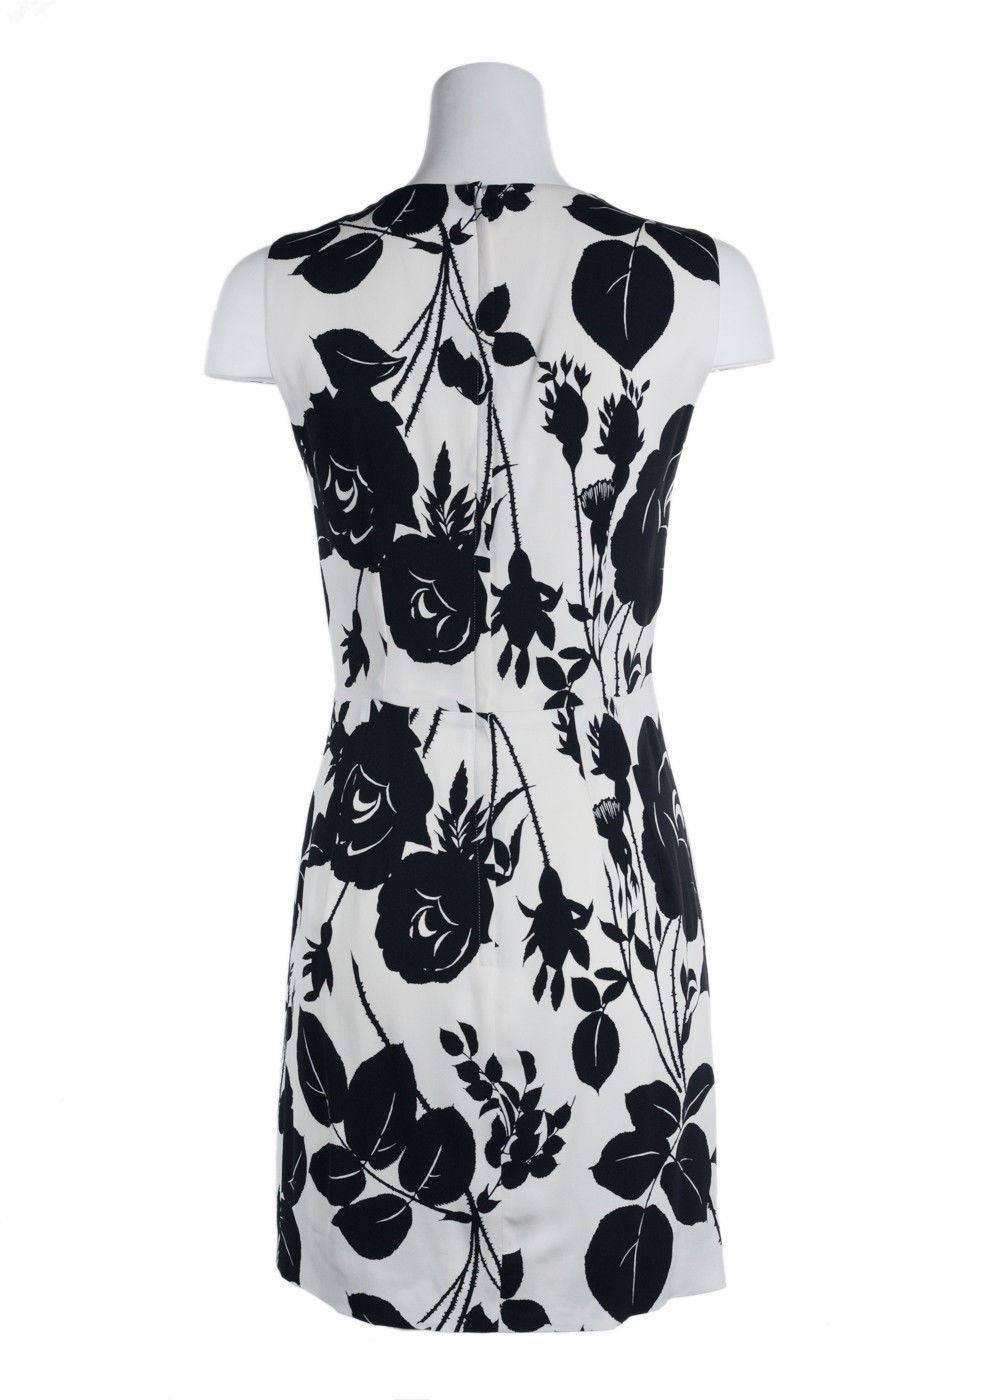 Brand New Dolce & Gabbana Women's Dress
Original Tags & Hanger Included
Retails in Stores & Online for $2895
Size IT44 / US8 Fits True to Size

Dolce & Gabbana's viscose blend floral sleeveless dress. This sleeveless designer dress features black